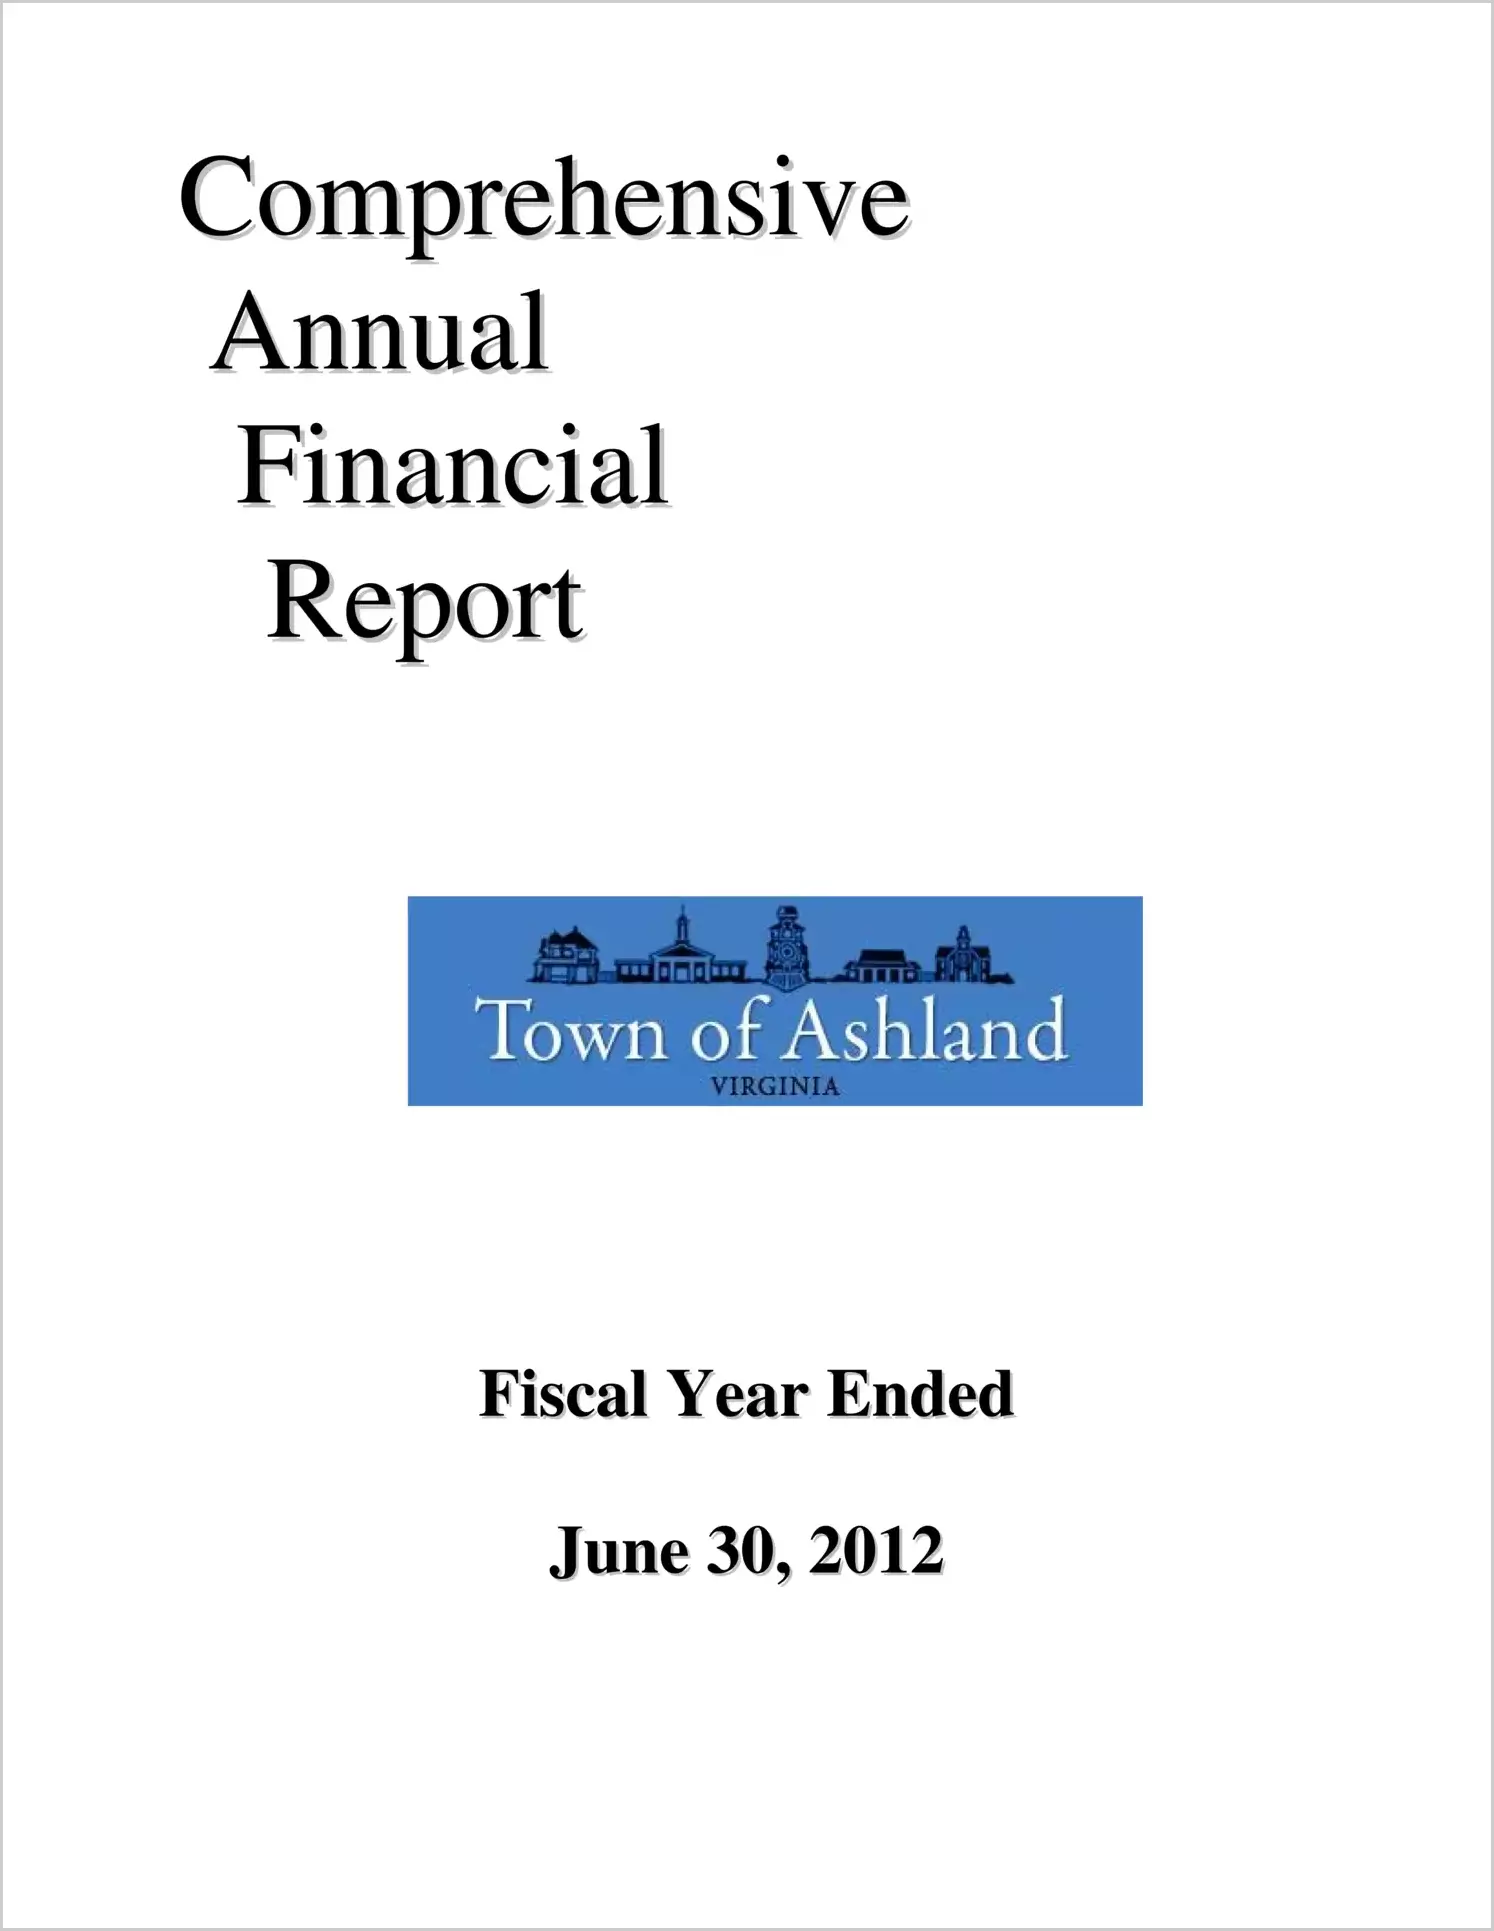 2012 Annual Financial Report for Town of Ashland